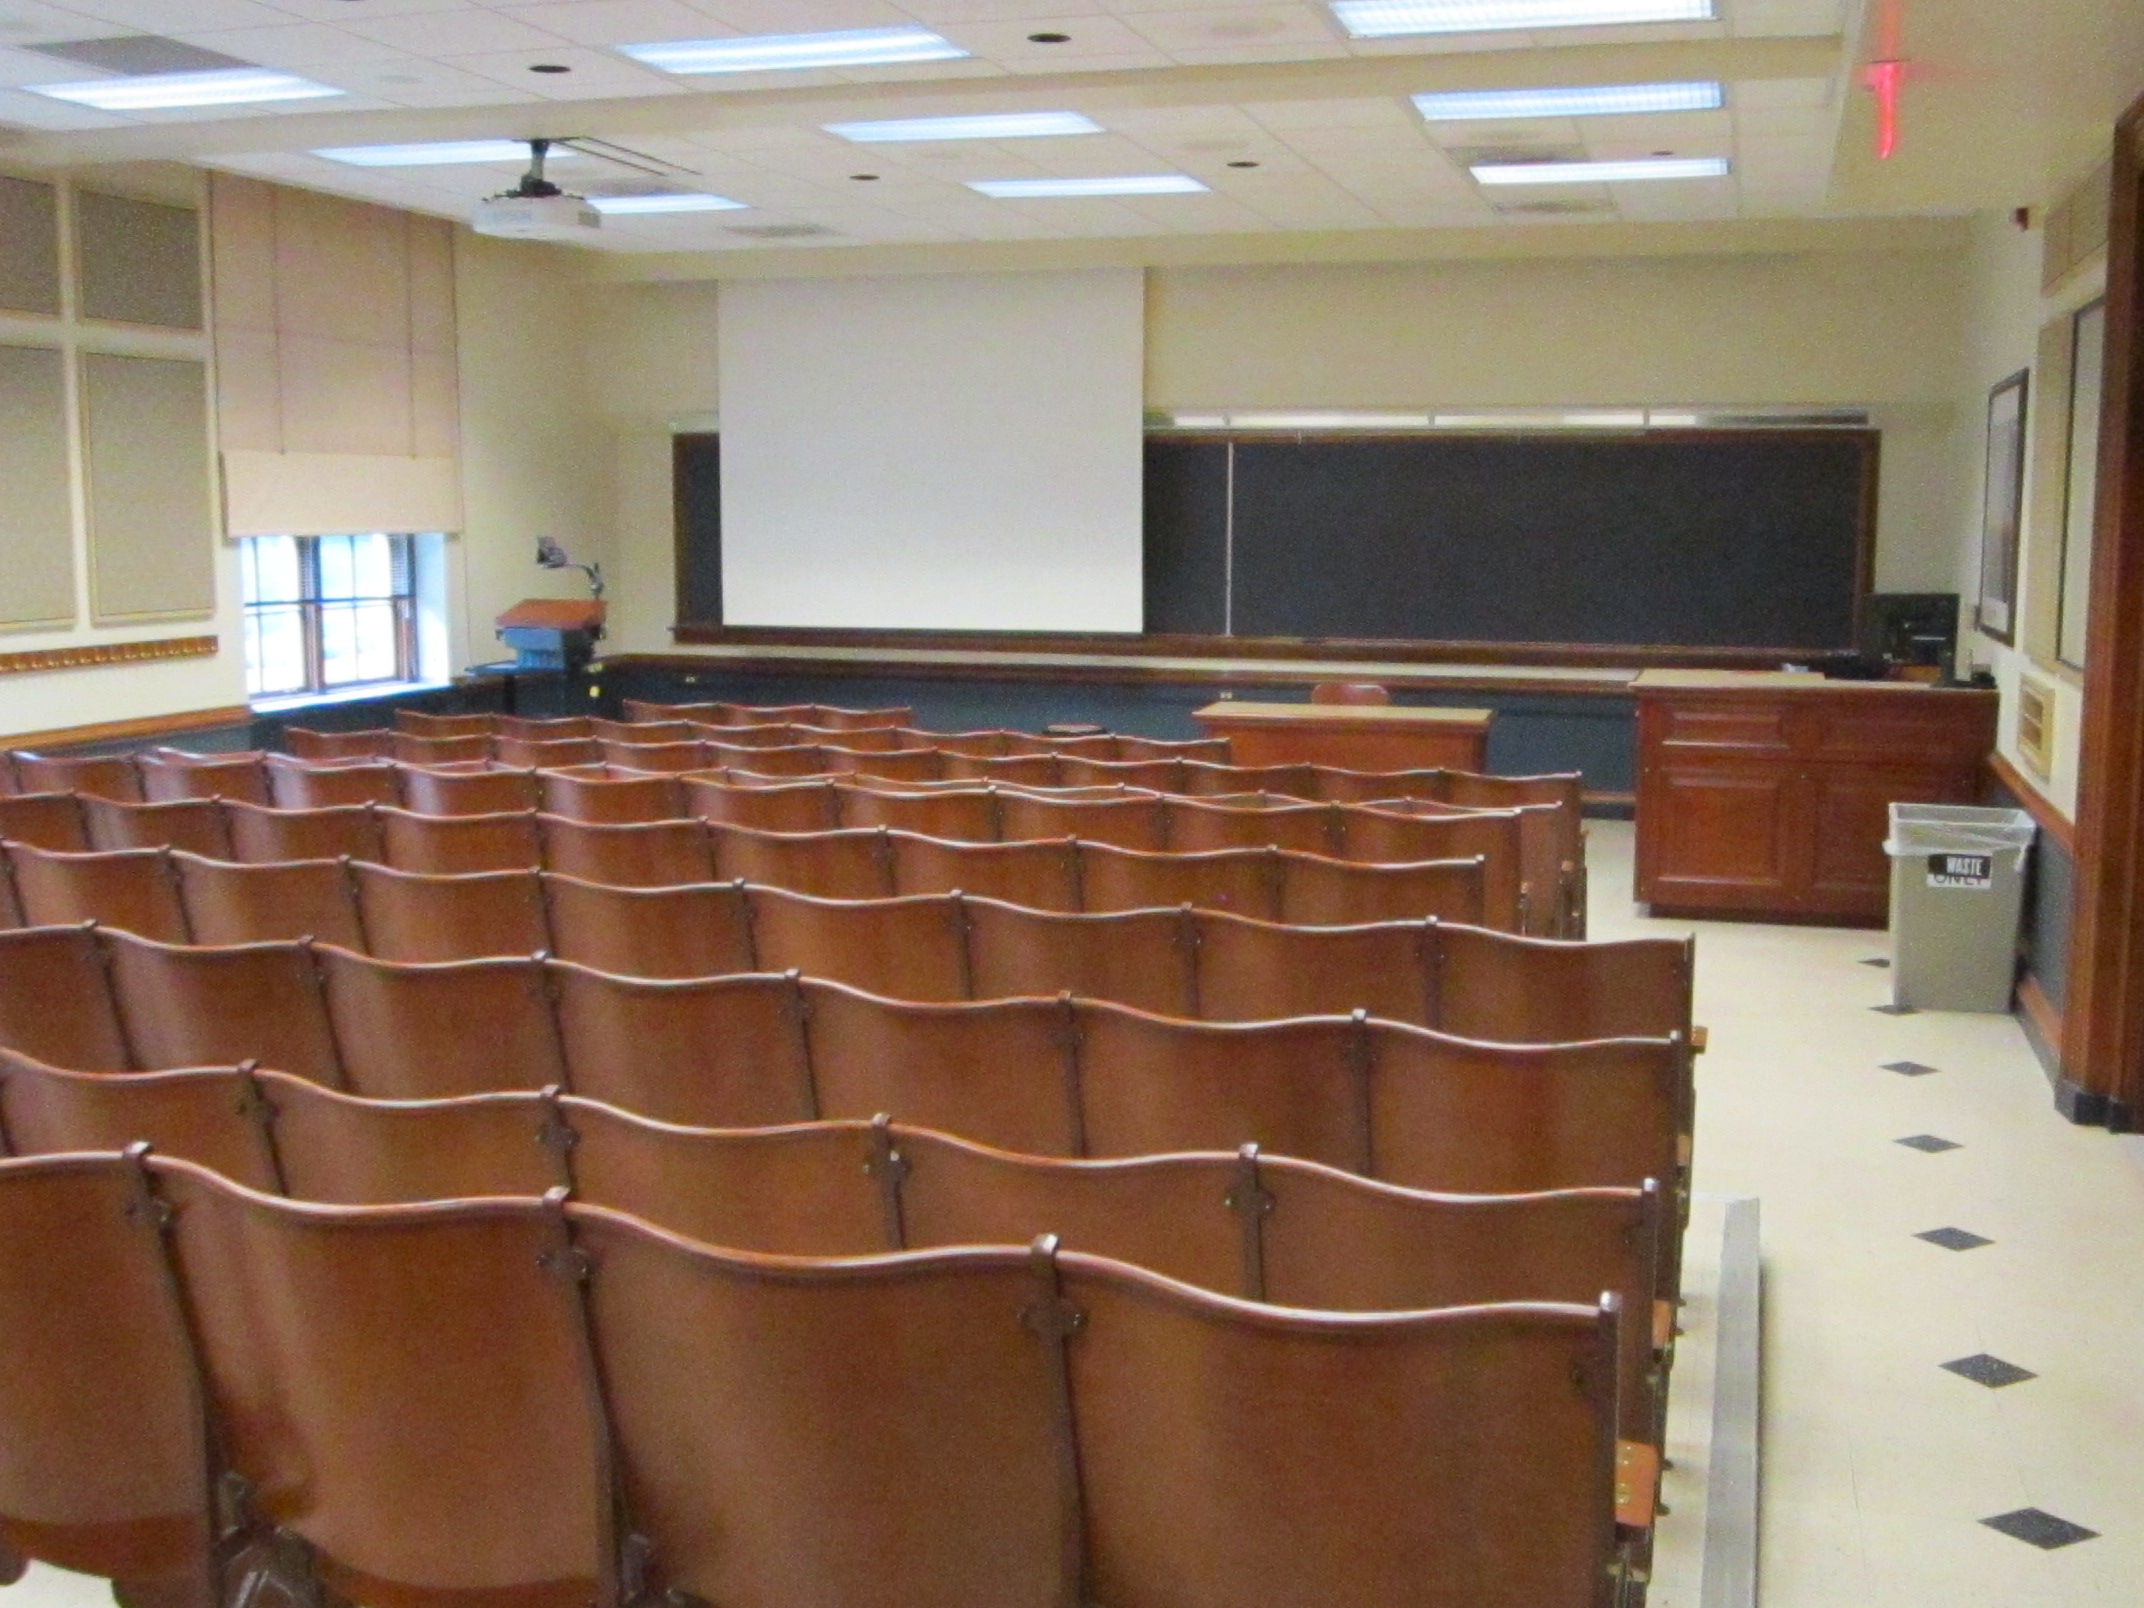 A view of the classroom with theater auditorium seating, chalkboards, and instructor table in front.